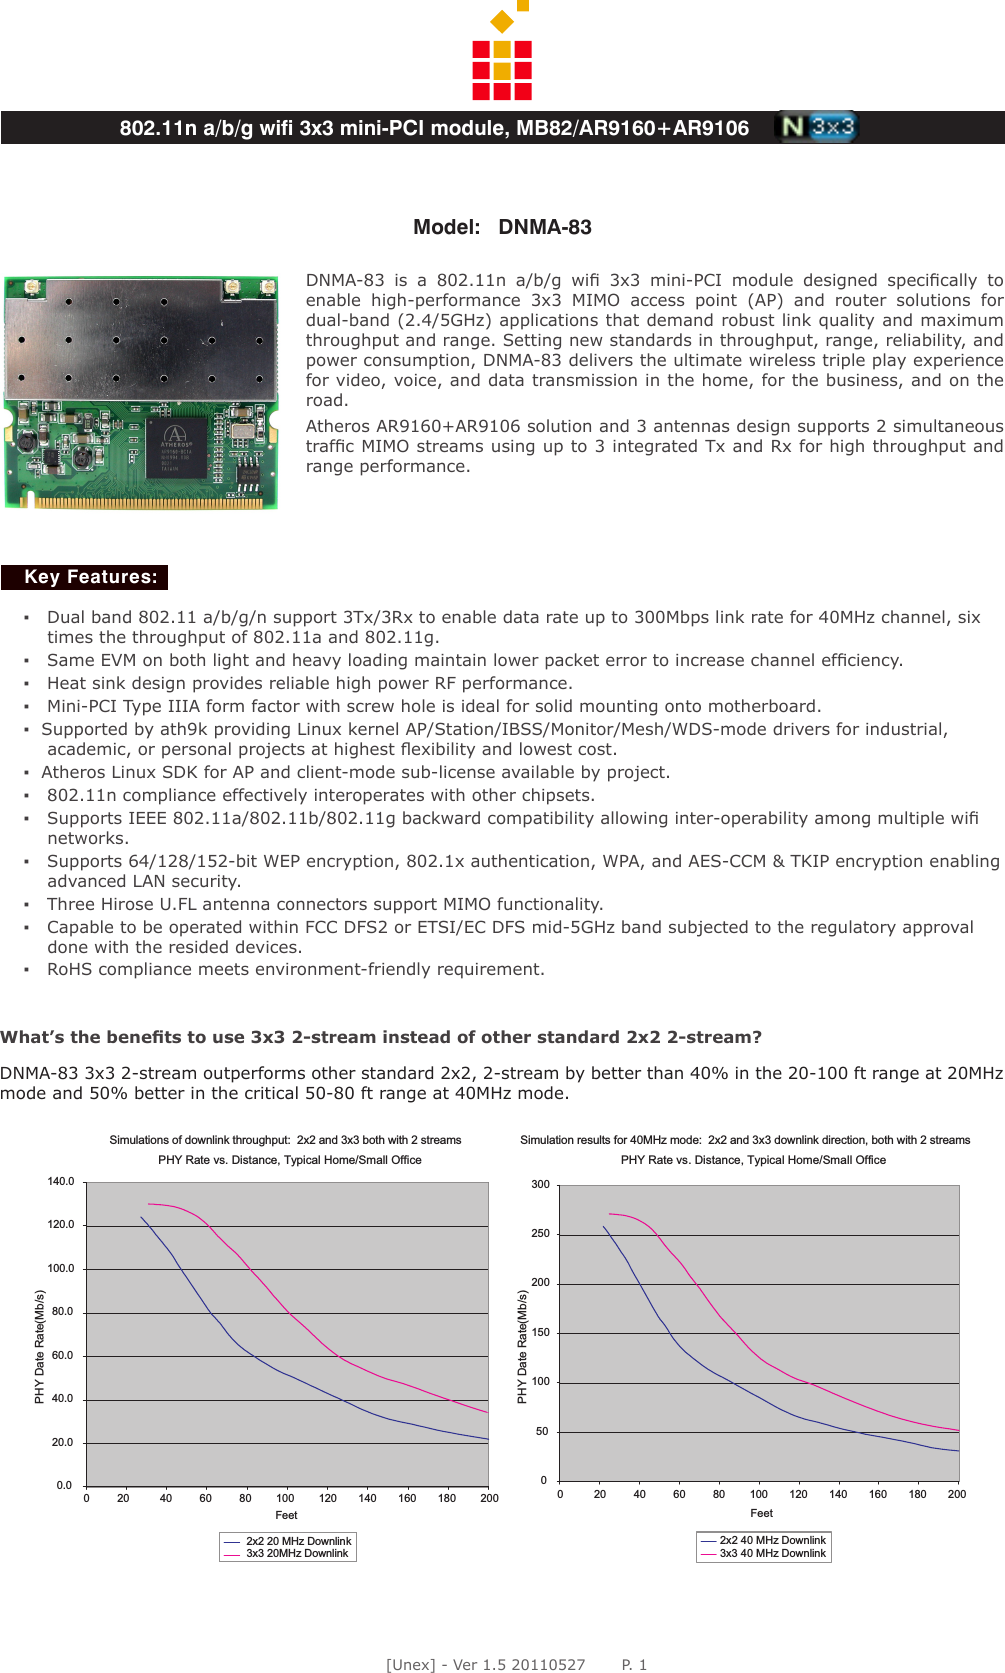 [Unex] - Ver 1.5 20110527       P. 1DNMA-83  is  a  802.11n  a/b/g  wiﬁ  3x3  mini-PCI  module  designed  speciﬁcally  to enable  high-performance  3x3  MIMO  access  point  (AP)  and  router  solutions  for dual-band (2.4/5GHz) applications that demand robust link quality and maximum throughput and range. Setting new standards in throughput, range, reliability, and power consumption, DNMA-83 delivers the ultimate wireless triple play experience for video, voice, and data transmission in the home, for the business, and on the road.  Atheros AR9160+AR9106 solution and 3 antennas design supports 2 simultaneous trafﬁc MIMO streams using up to 3 integrated Tx and Rx for high throughput and range performance.▪   Dual band 802.11 a/b/g/n support 3Tx/3Rx to enable data rate up to 300Mbps link rate for 40MHz channel, six times the throughput of 802.11a and 802.11g.▪   Same EVM on both light and heavy loading maintain lower packet error to increase channel efﬁciency.▪   Heat sink design provides reliable high power RF performance.▪   Mini-PCI Type IIIA form factor with screw hole is ideal for solid mounting onto motherboard.▪  Supported by ath9k providing Linux kernel AP/Station/IBSS/Monitor/Mesh/WDS-mode drivers for industrial, academic, or personal projects at highest ﬂexibility and lowest cost. ▪  Atheros Linux SDK for AP and client-mode sub-license available by project.▪   802.11n compliance effectively interoperates with other chipsets.▪   Supports IEEE 802.11a/802.11b/802.11g backward compatibility allowing inter-operability among multiple wiﬁ networks. ▪   Supports 64/128/152-bit WEP encryption, 802.1x authentication, WPA, and AES-CCM &amp; TKIP encryption enabling advanced LAN security.▪   Three Hirose U.FL antenna connectors support MIMO functionality. ▪   Capable to be operated within FCC DFS2 or ETSI/EC DFS mid-5GHz band subjected to the regulatory approval done with the resided devices.▪   RoHS compliance meets environment-friendly requirement.Key Features:802.11n a/b/g wifi 3x3 mini-PCI module, MB82/AR9160+AR9106Model:   DNMA-83What’s the beneﬁts to use 3x3 2-stream instead of other standard 2x2 2-stream?DNMA-83 3x3 2-stream outperforms other standard 2x2, 2-stream by better than 40% in the 20-100 ft range at 20MHz mode and 50% better in the critical 50-80 ft range at 40MHz mode.  Simulations of downlink throughput:  2x2 and 3x3 both with 2 streams PHY Rate vs. Distance, Typical Home/Small Office0.020.040.060.080.0100.0120.0140.00         20          40         60         80        100        120       140       160       180        200Feet2x2 20 MHz Downlink3x3 20MHz Downlink Simulation results for 40MHz mode:  2x2 and 3x3 downlink direction, both with 2 streams PHY Rate vs. Distance, Typical Home/Small Office0501001502002503000          20         40         60         80        100       120       140       160       180       200Feet2x2 40 MHz Downlink3x3 40 MHz DownlinkPHY Date Rate(Mb/s)PHY Date Rate(Mb/s)